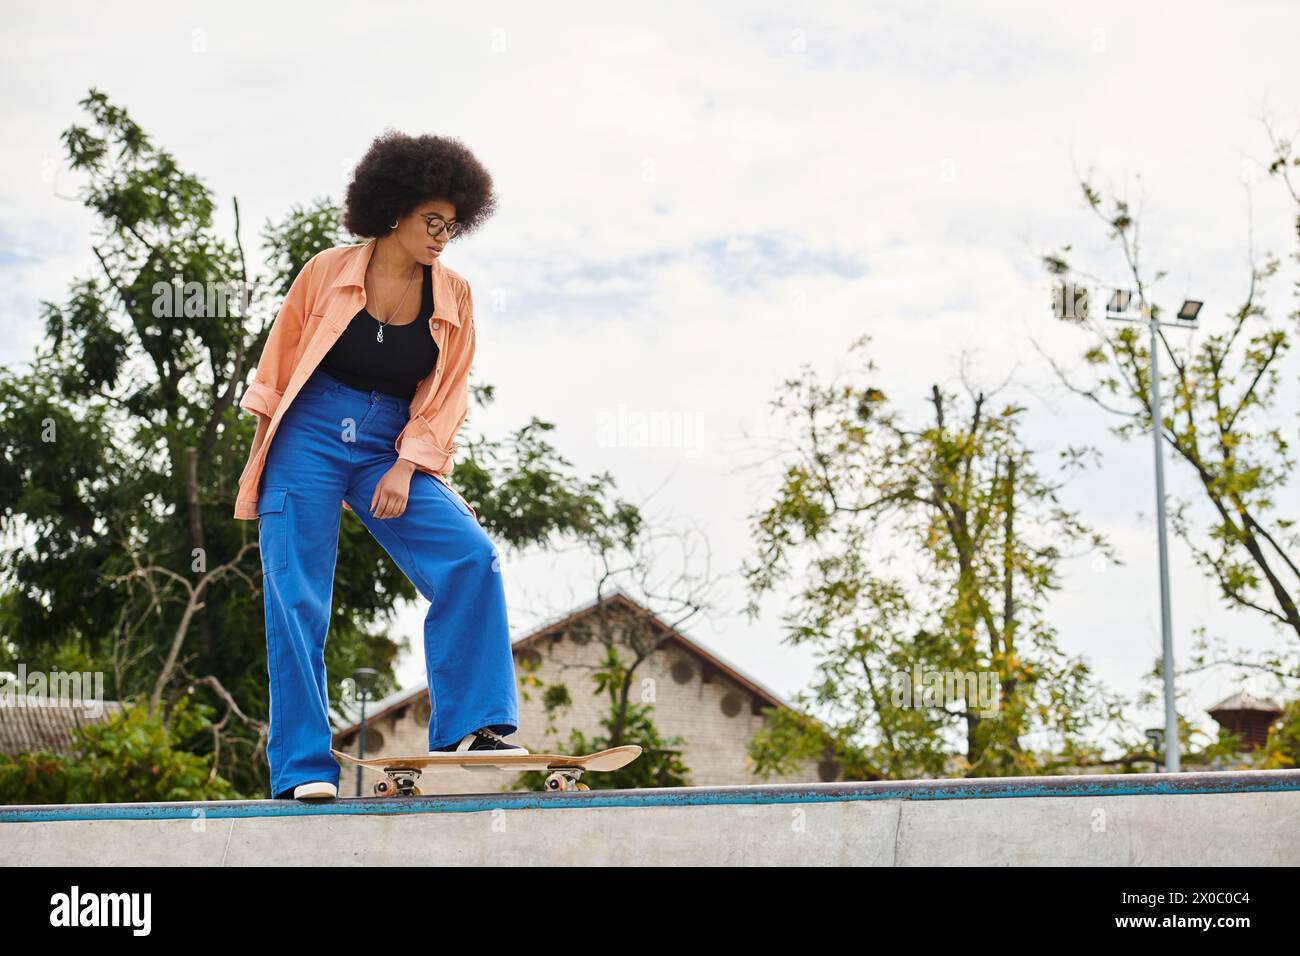 Young African American woman with curly hair riding skateboard on top of cement wall in outdoor skate park. Stock Photo